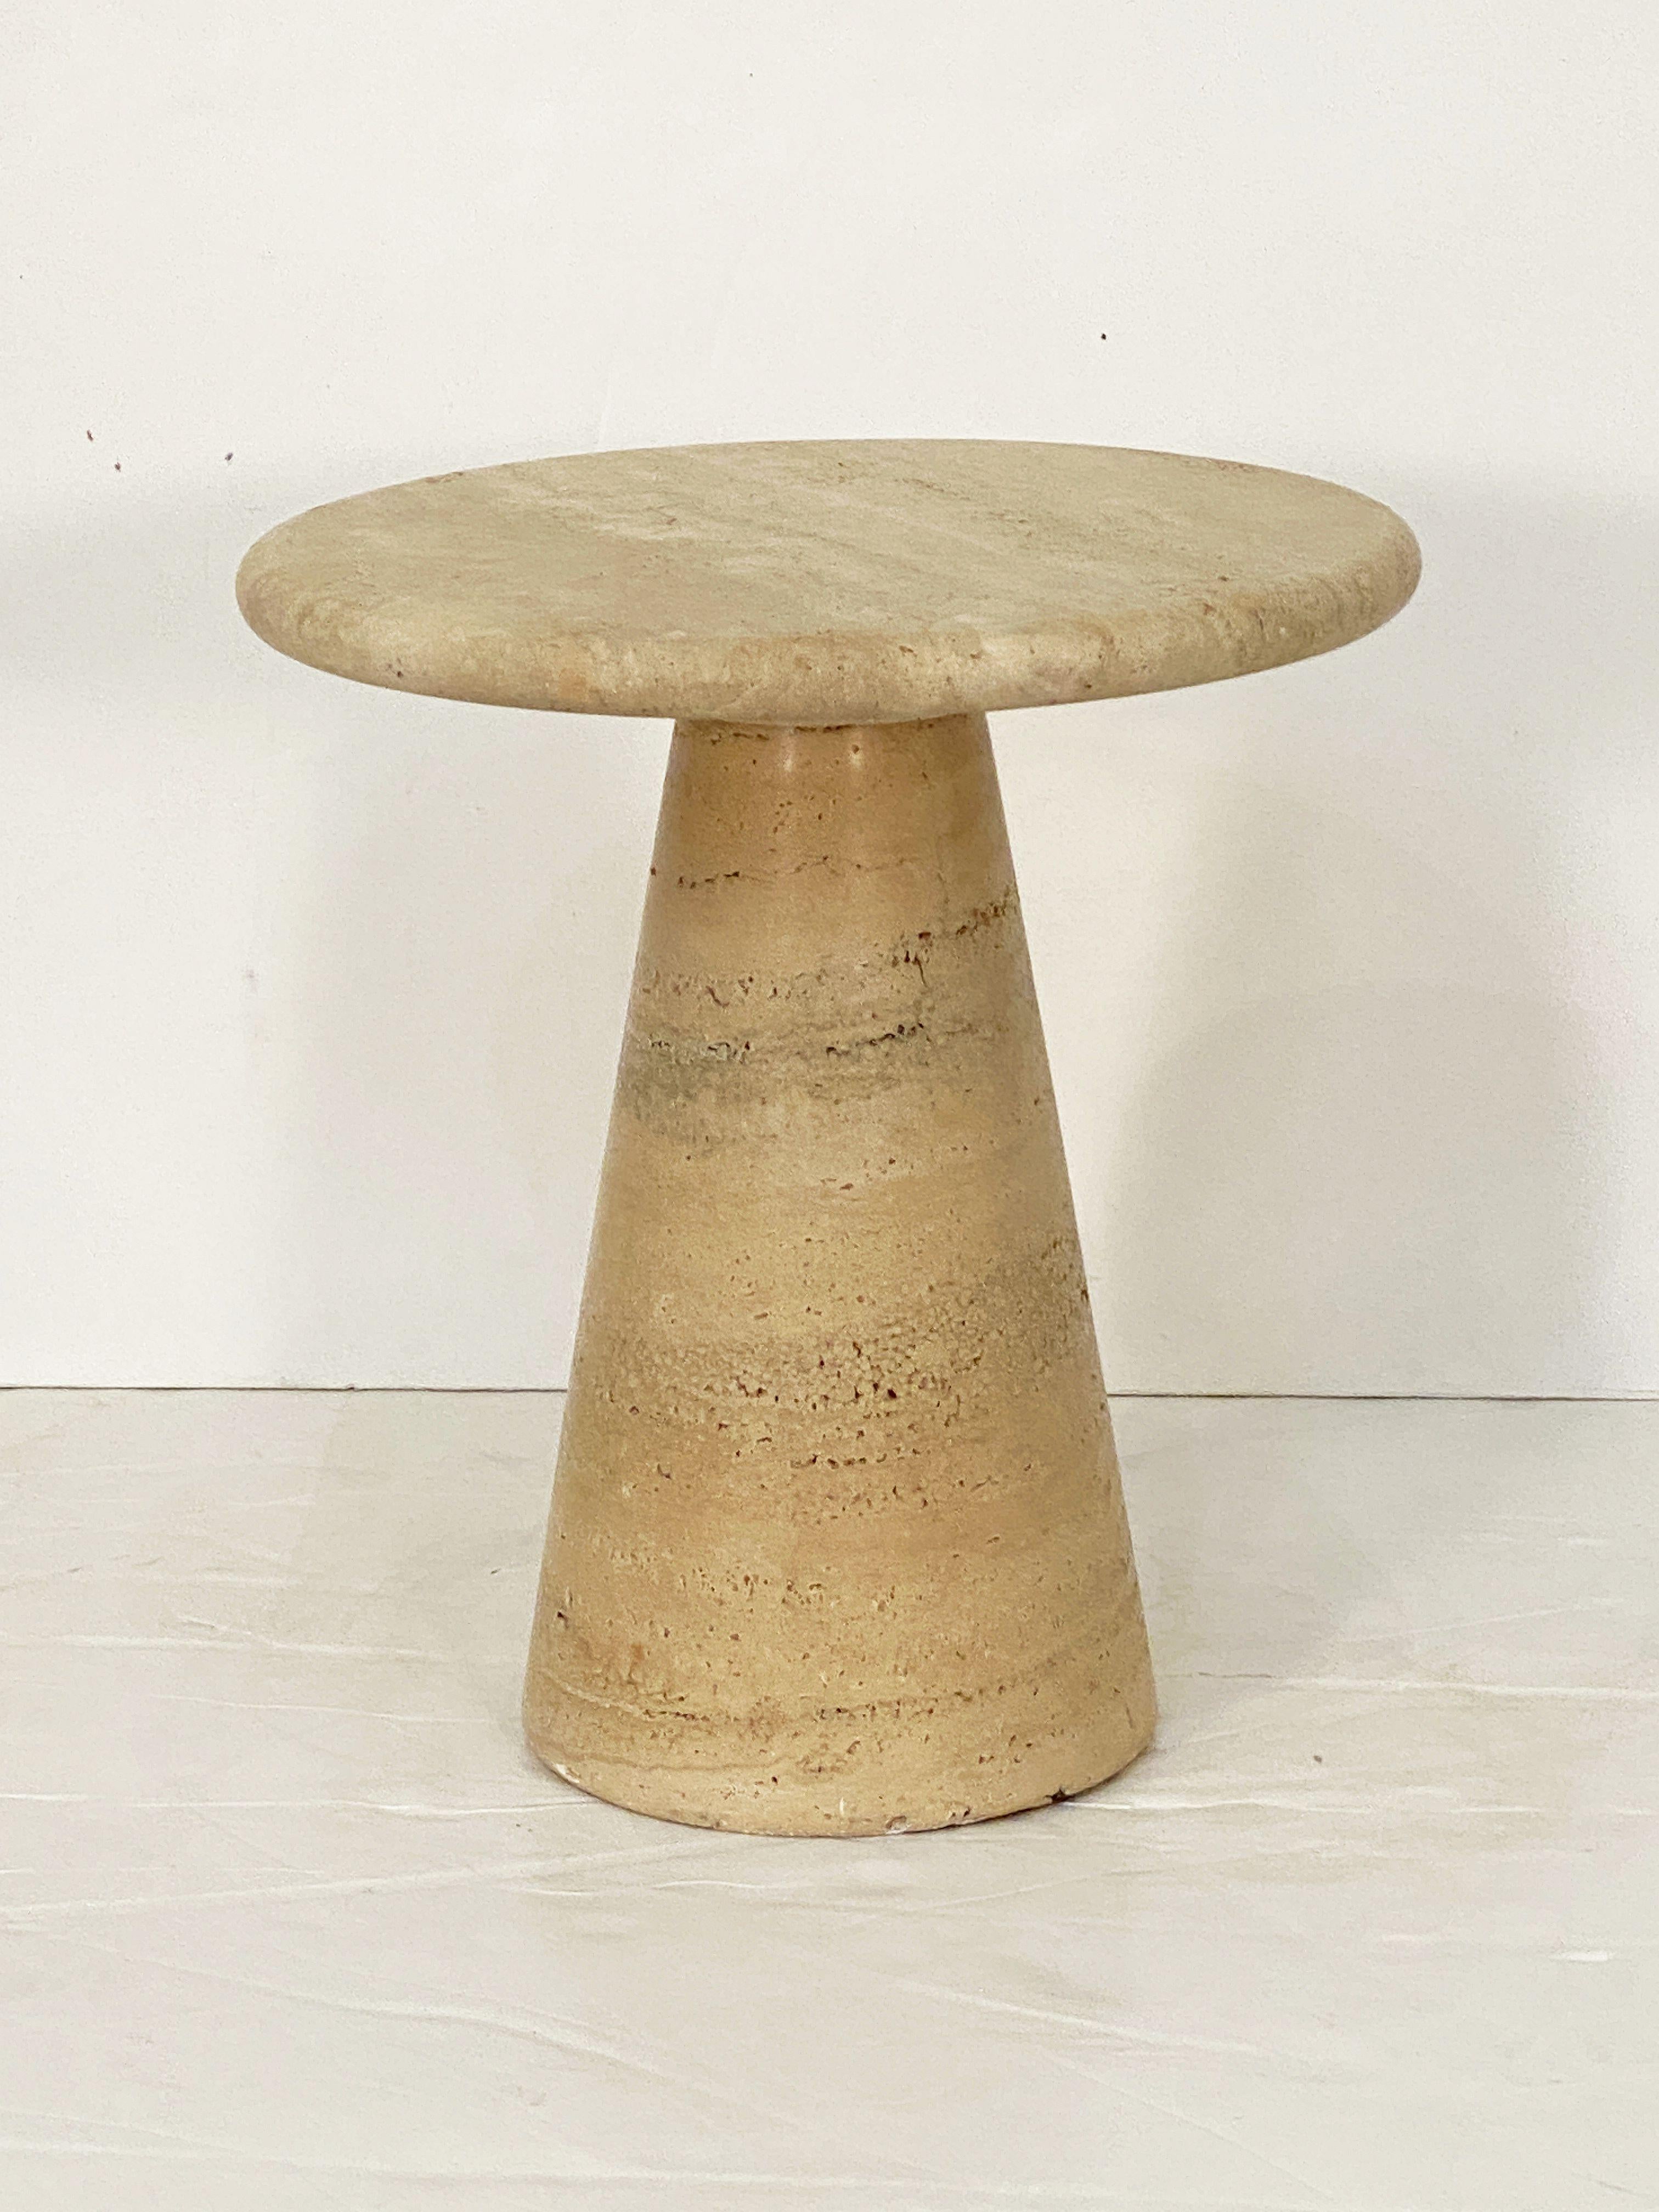 Modernist Conical Table of Travertine Stone from Italy (Four Available) For Sale 2